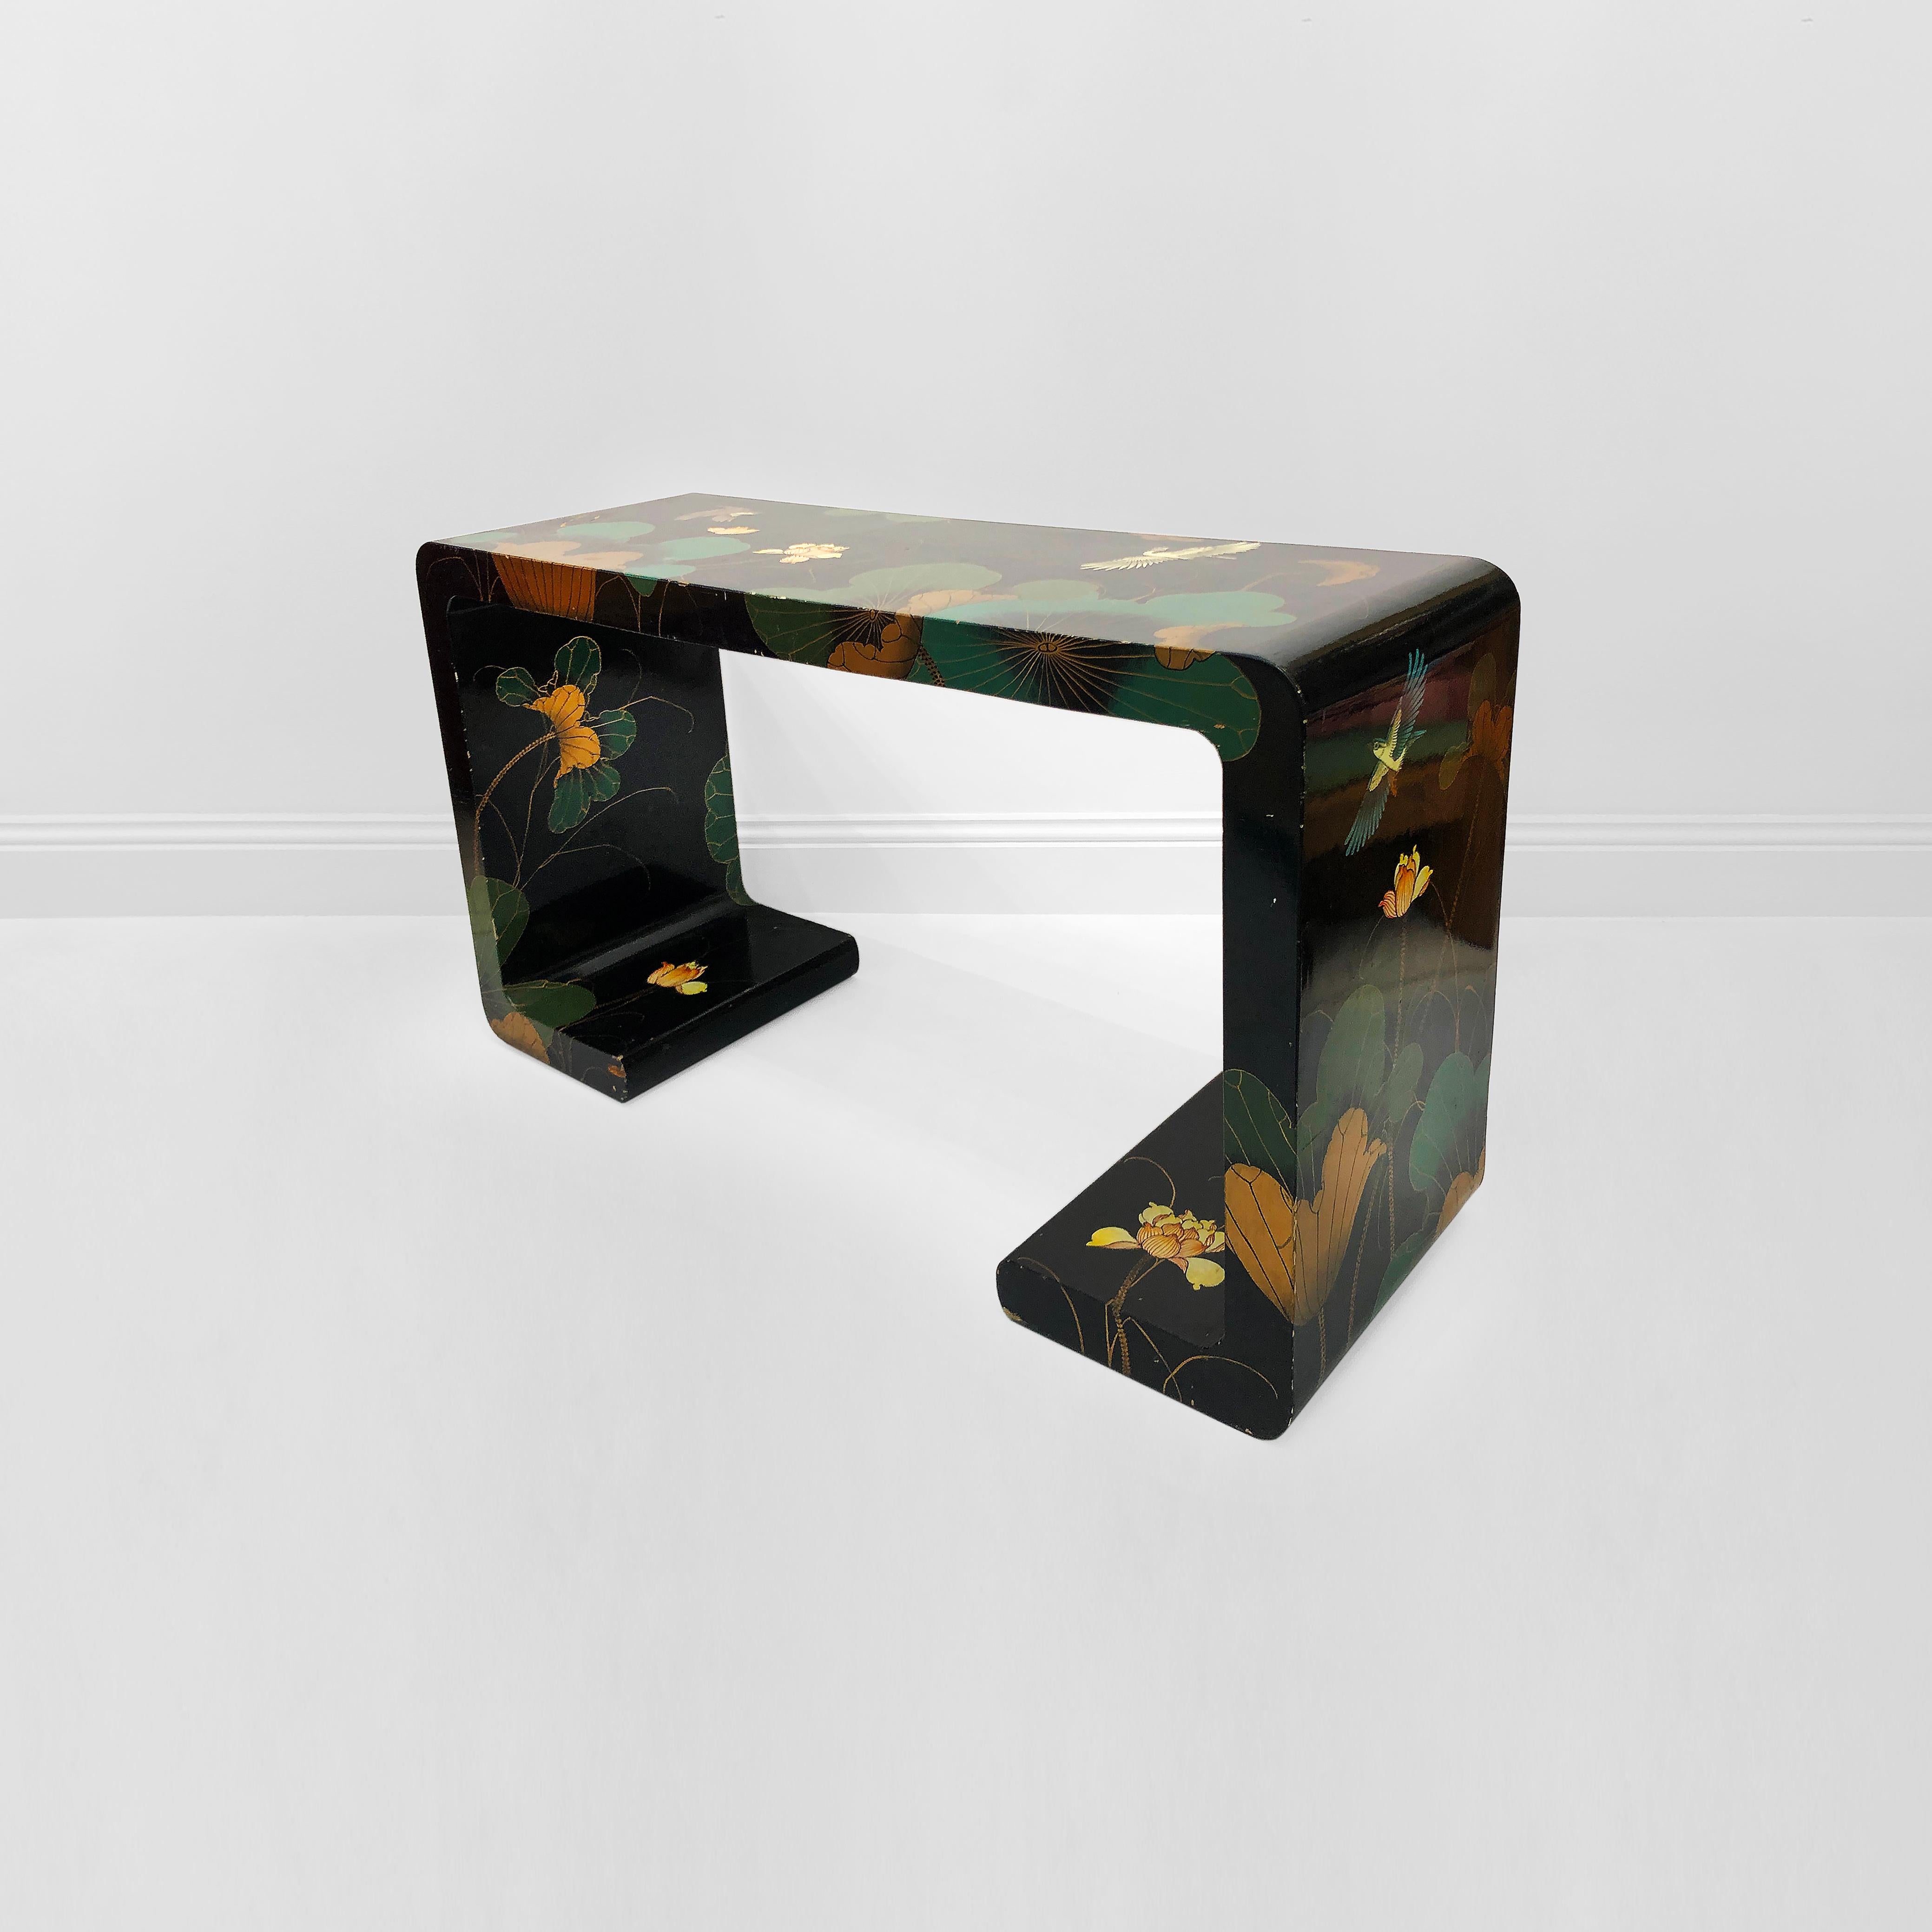 American 1970s Chinoiserie Hollywood Regency Waterfall Console Table Black Vintage Lamp For Sale